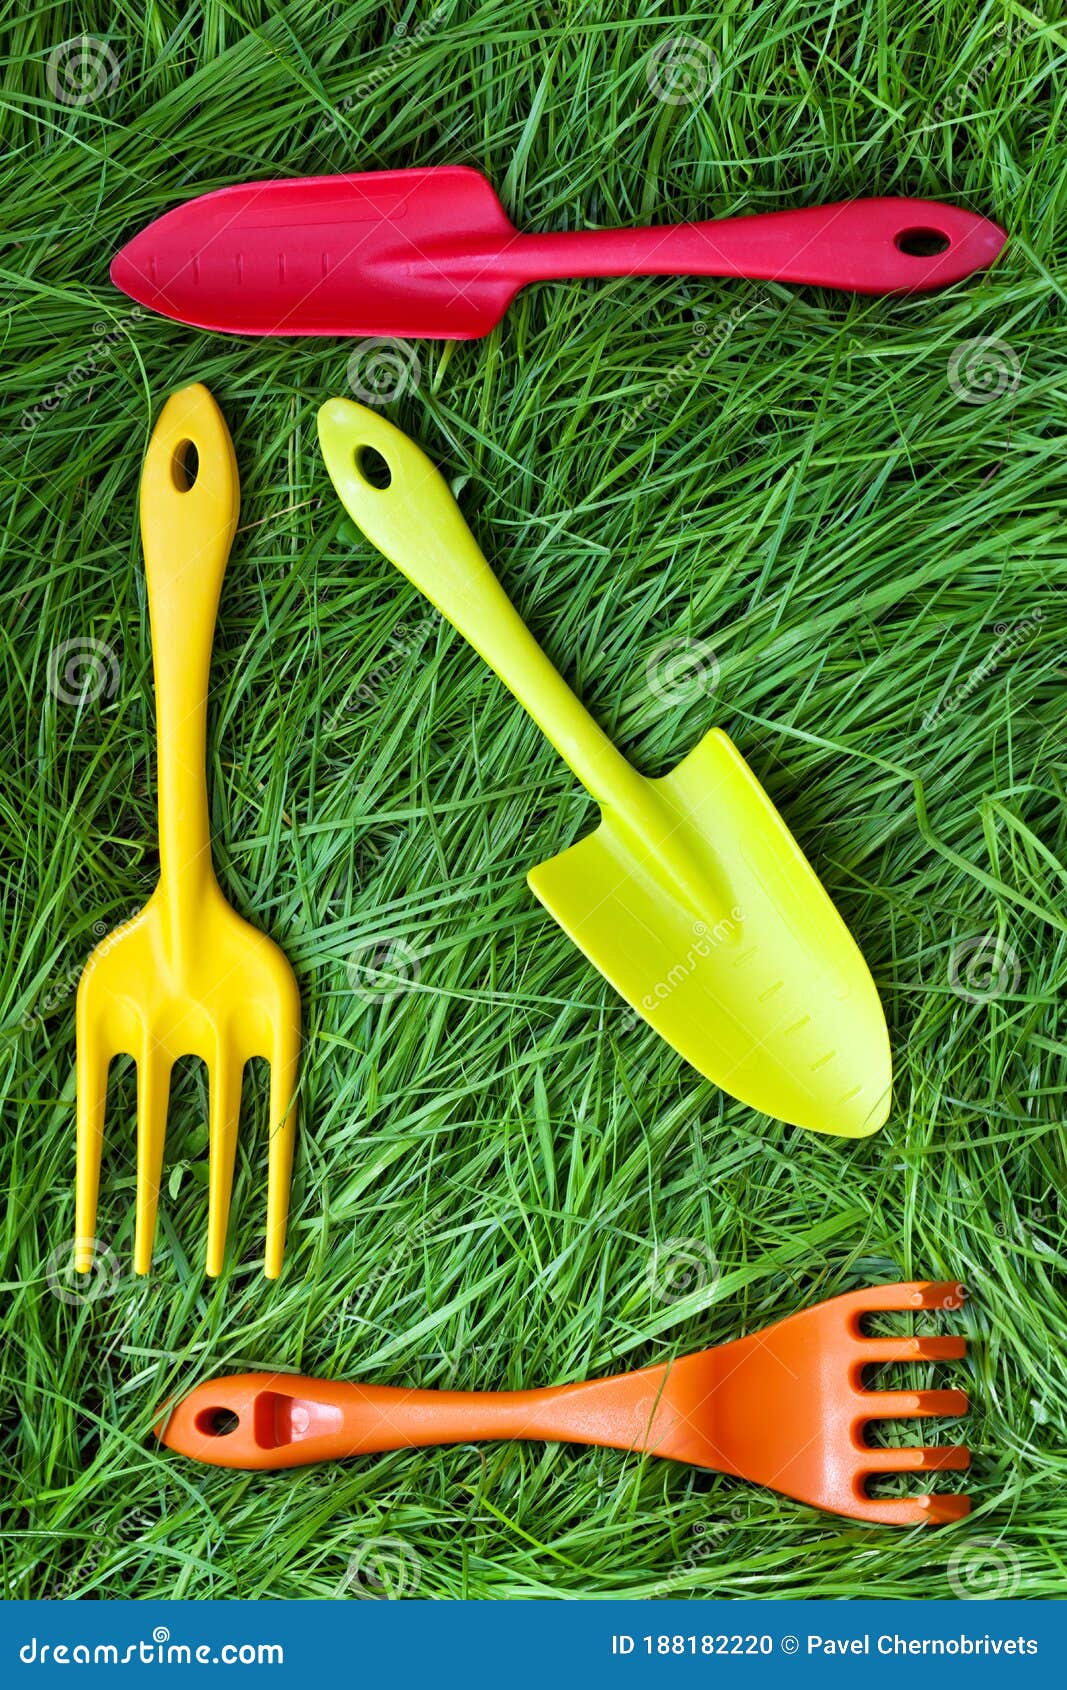 Set Of Gardening Tools On Grass Stock Photo - Image of growth ...